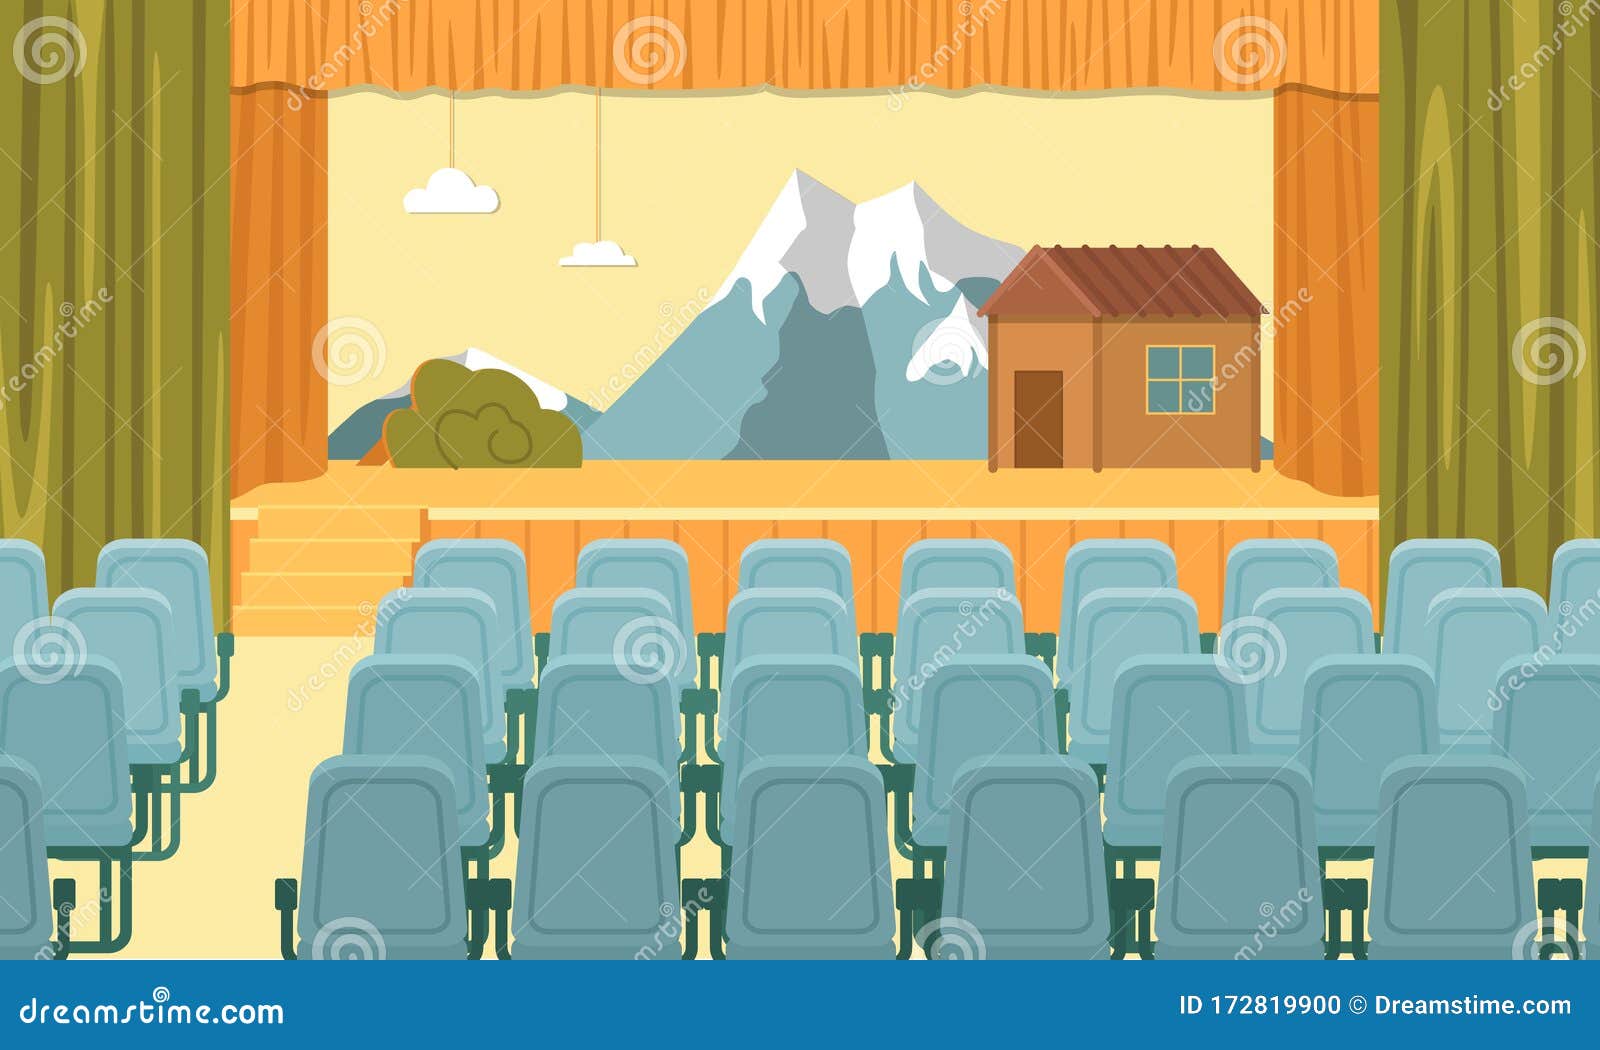 school assembly clipart